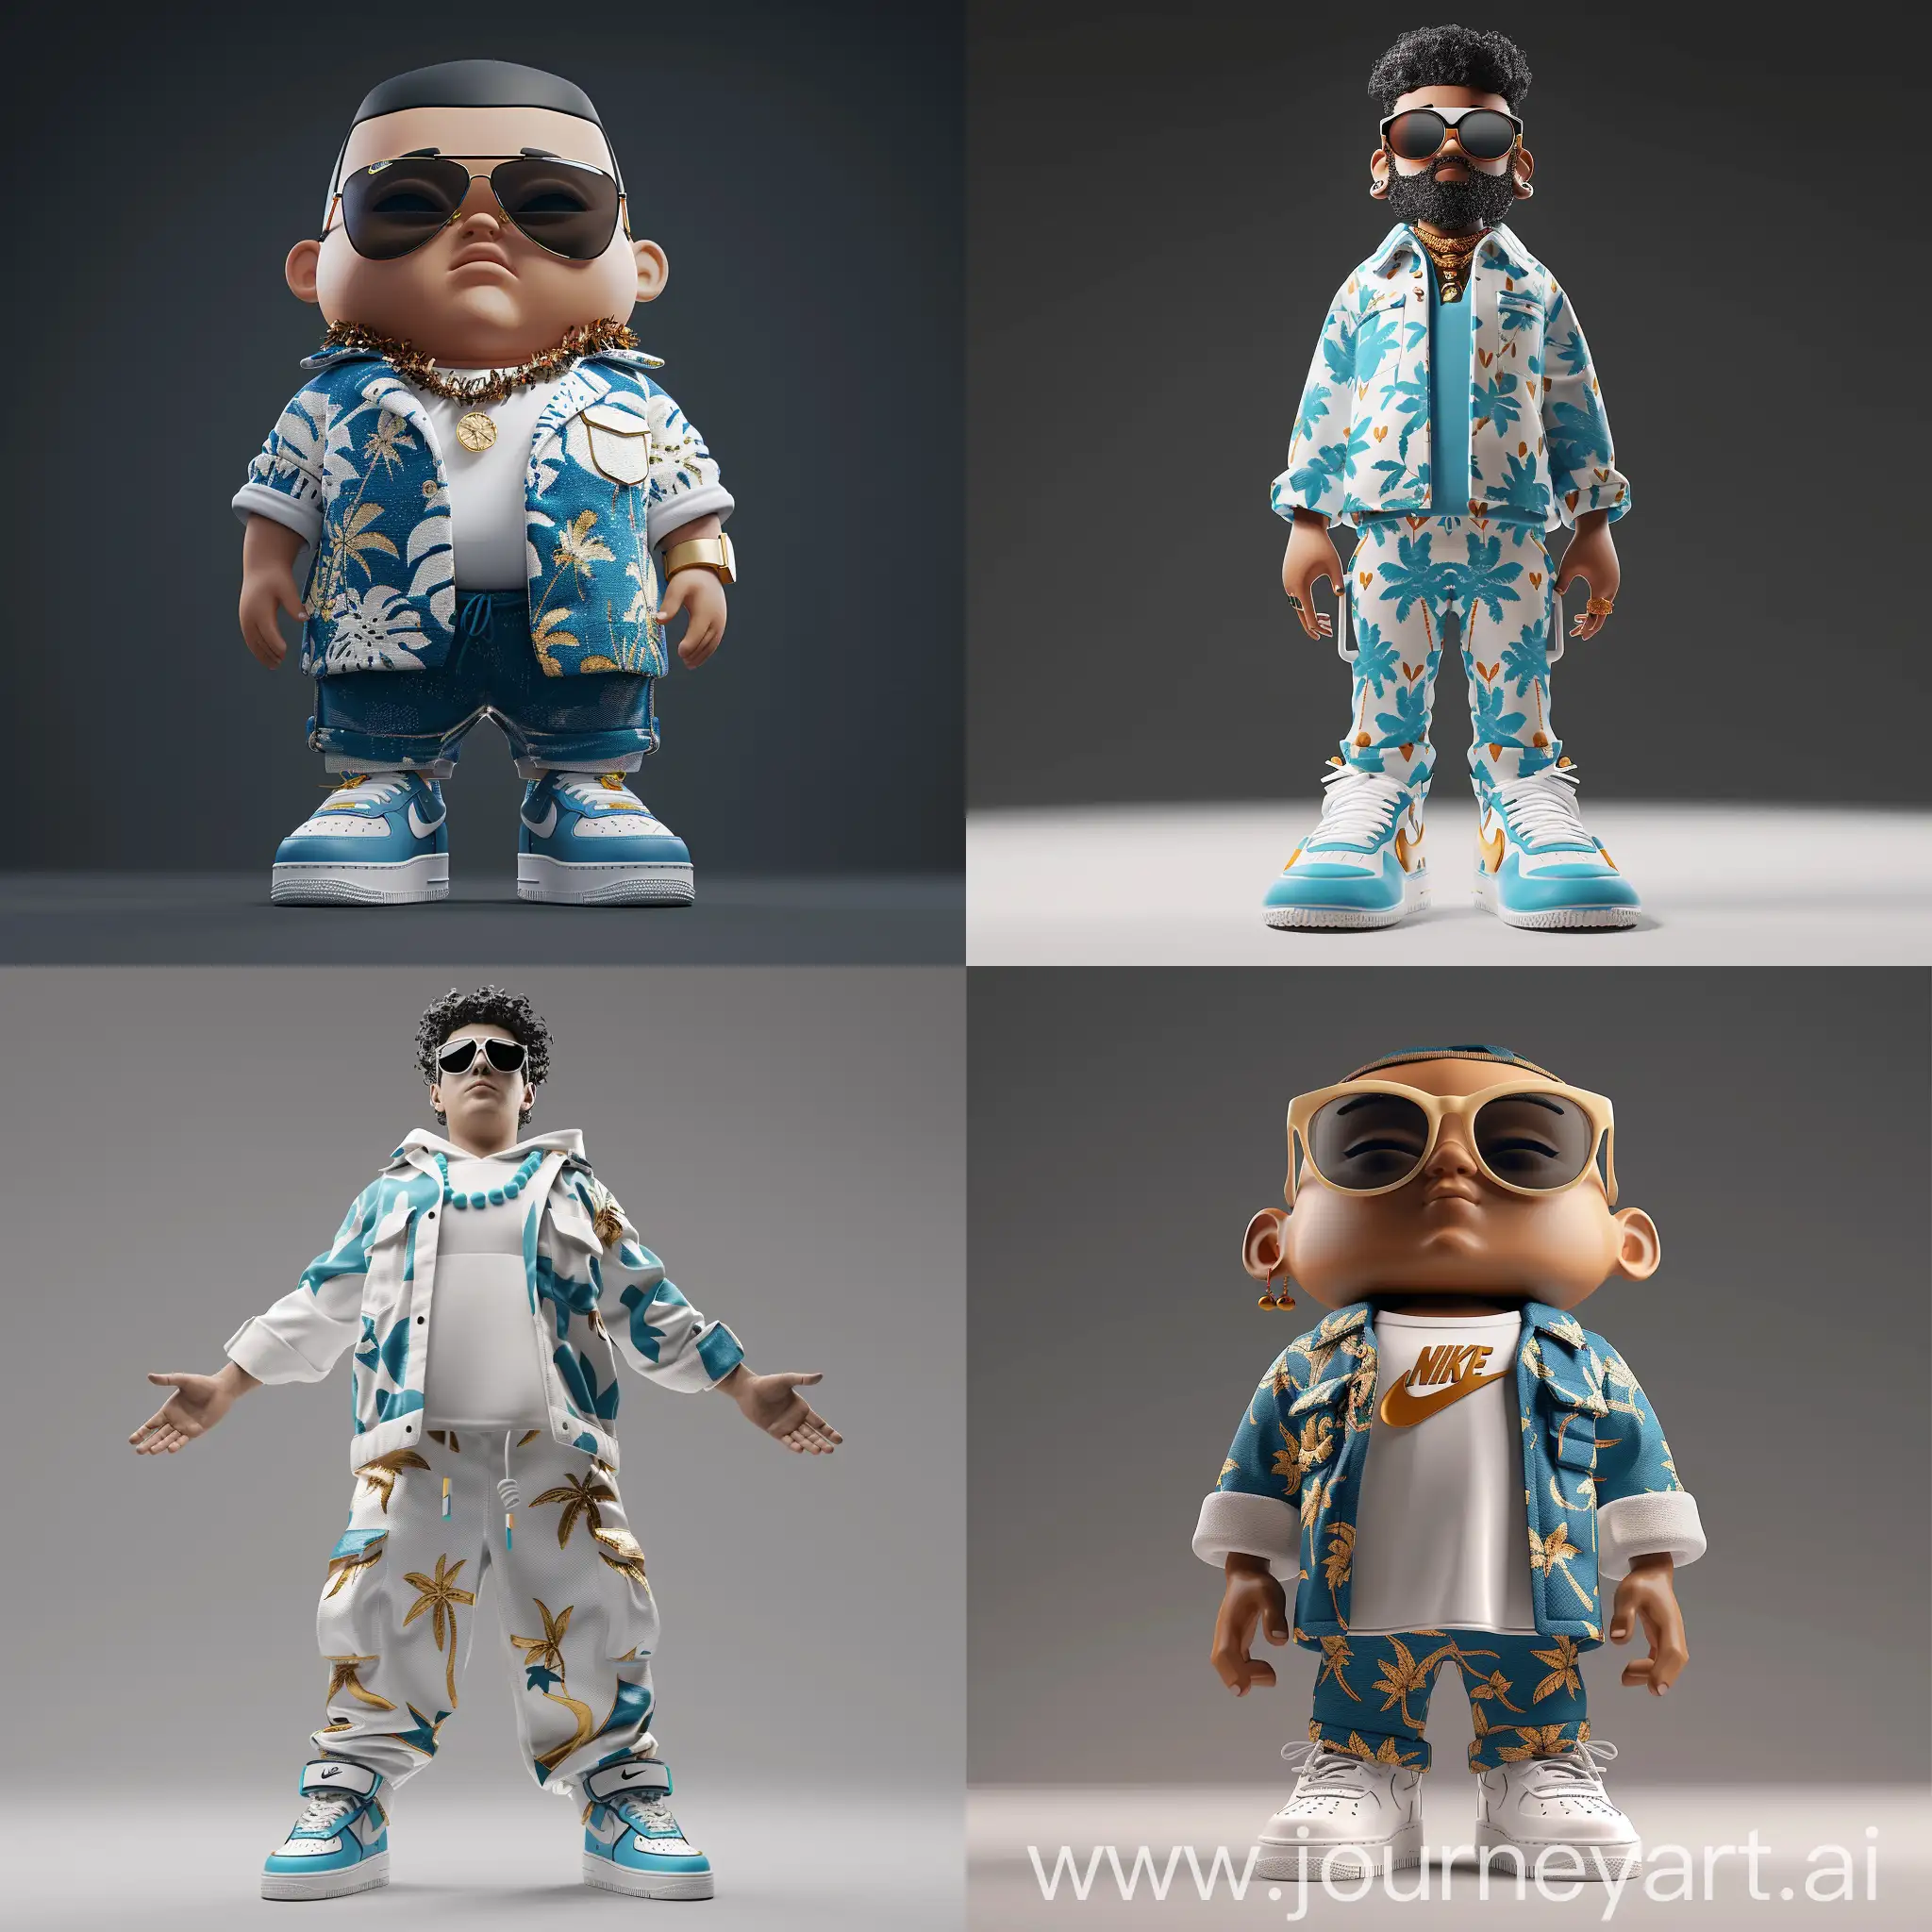 3d rendering full body character in white place, man wearing hawaii clothes and sunglasses and Nike airforce 1 (Blue, white, gold clothes details), Minimalism style, Simple black background Playful body language style --s 200 --v 6.0